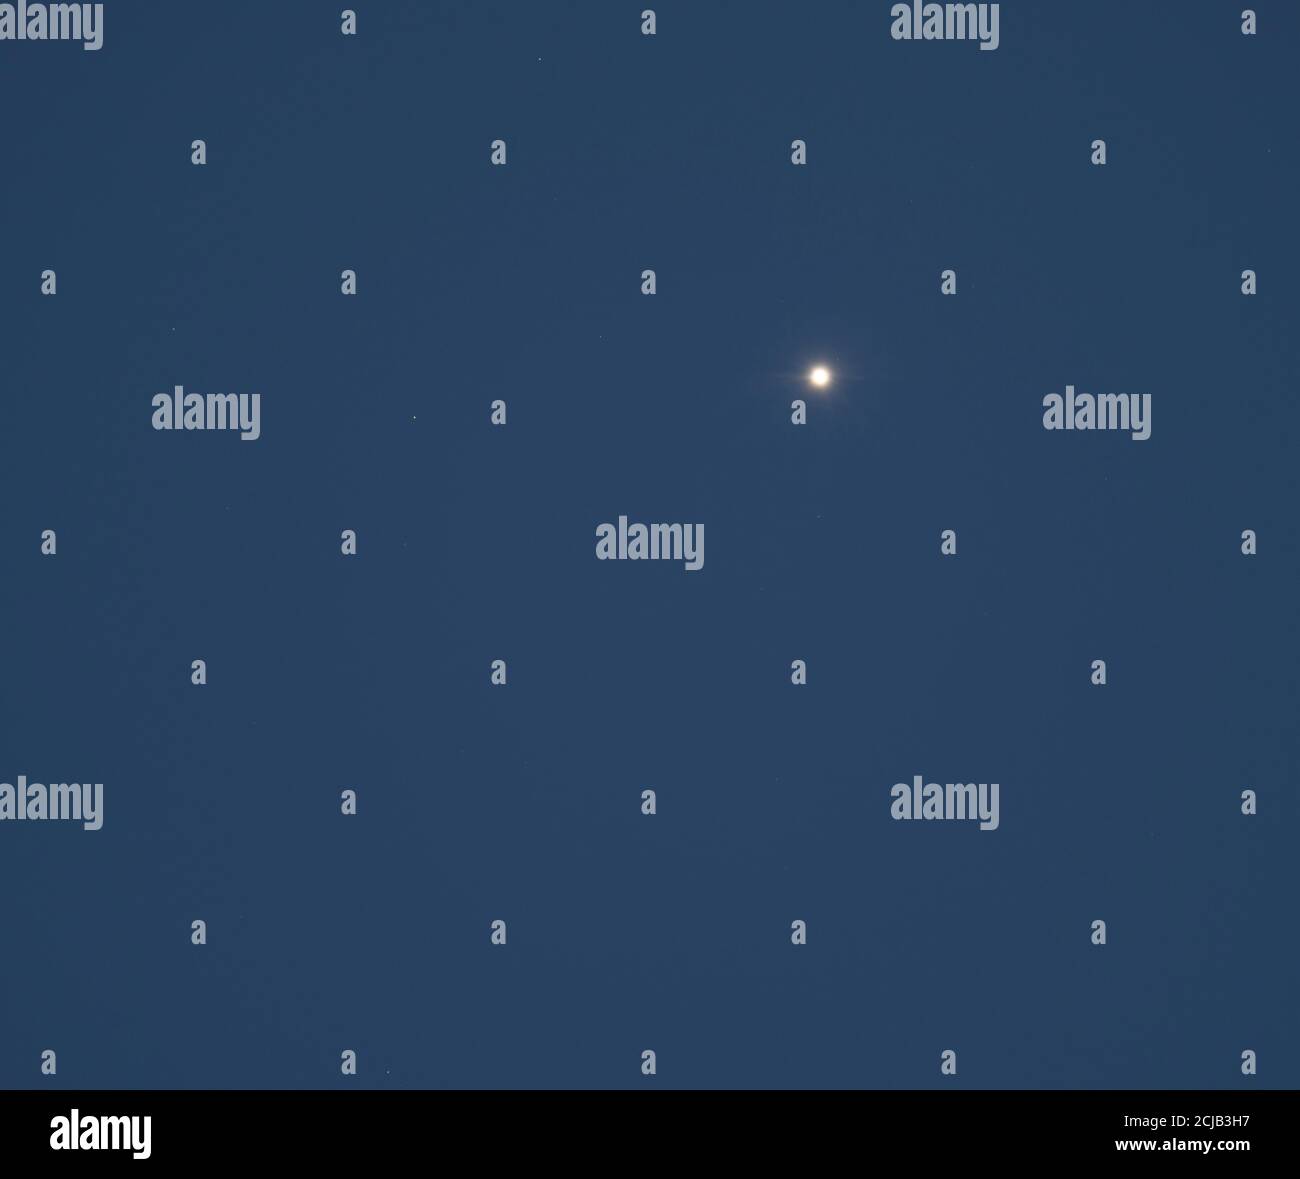 London, UK. 15 September 2020. Planet Venus shining brightly among fainter stars in pre-dawn clear sky above London. There is new interest in Venus after a rare chemical was analysed in the atmosphere of the planet. Credit: Malcolm Park/Alamy Live News. Stock Photo